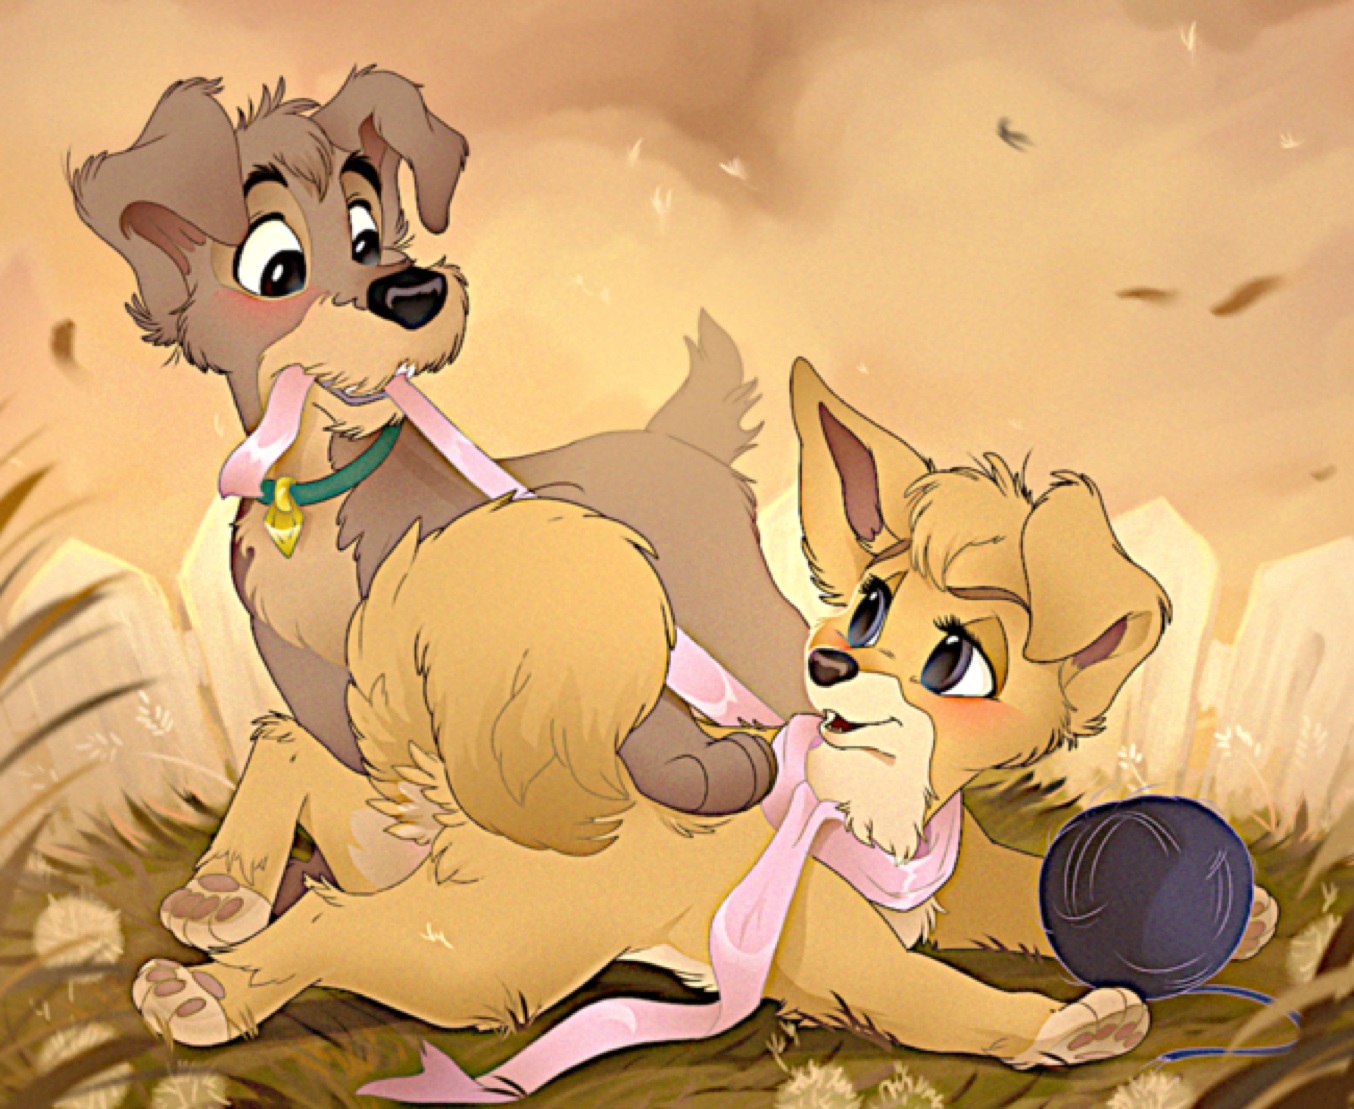 Angel(Lady and The Tramp 2) Images on Fanpop.